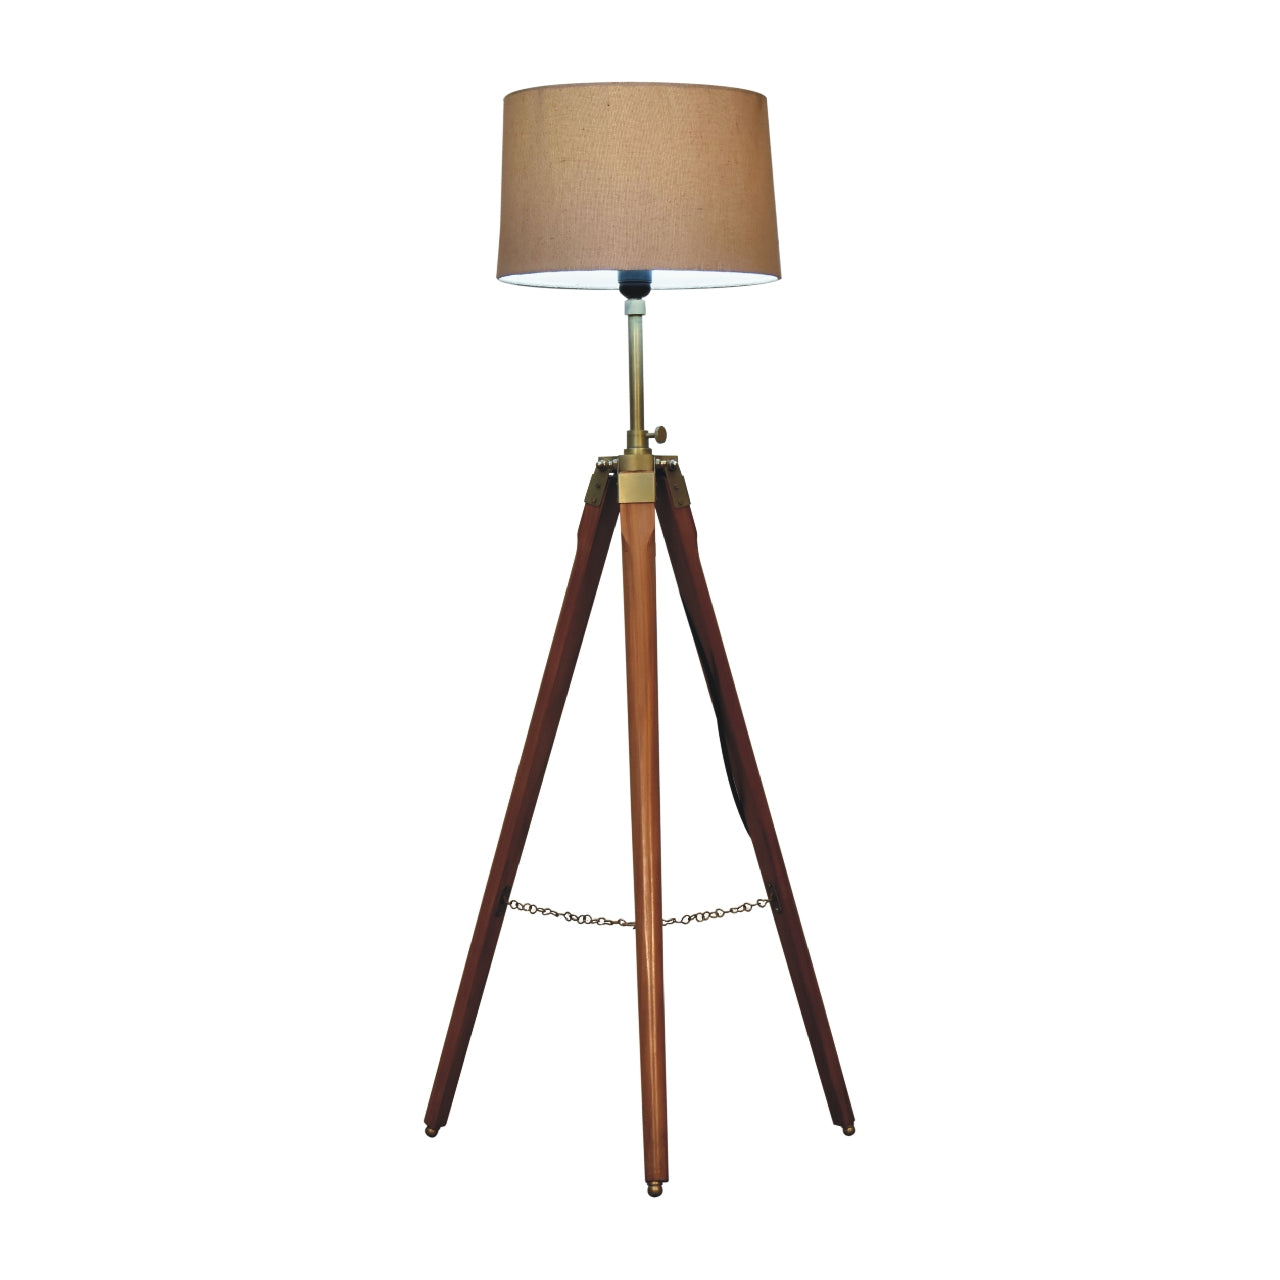 fixed brass plated tripod floor lamp